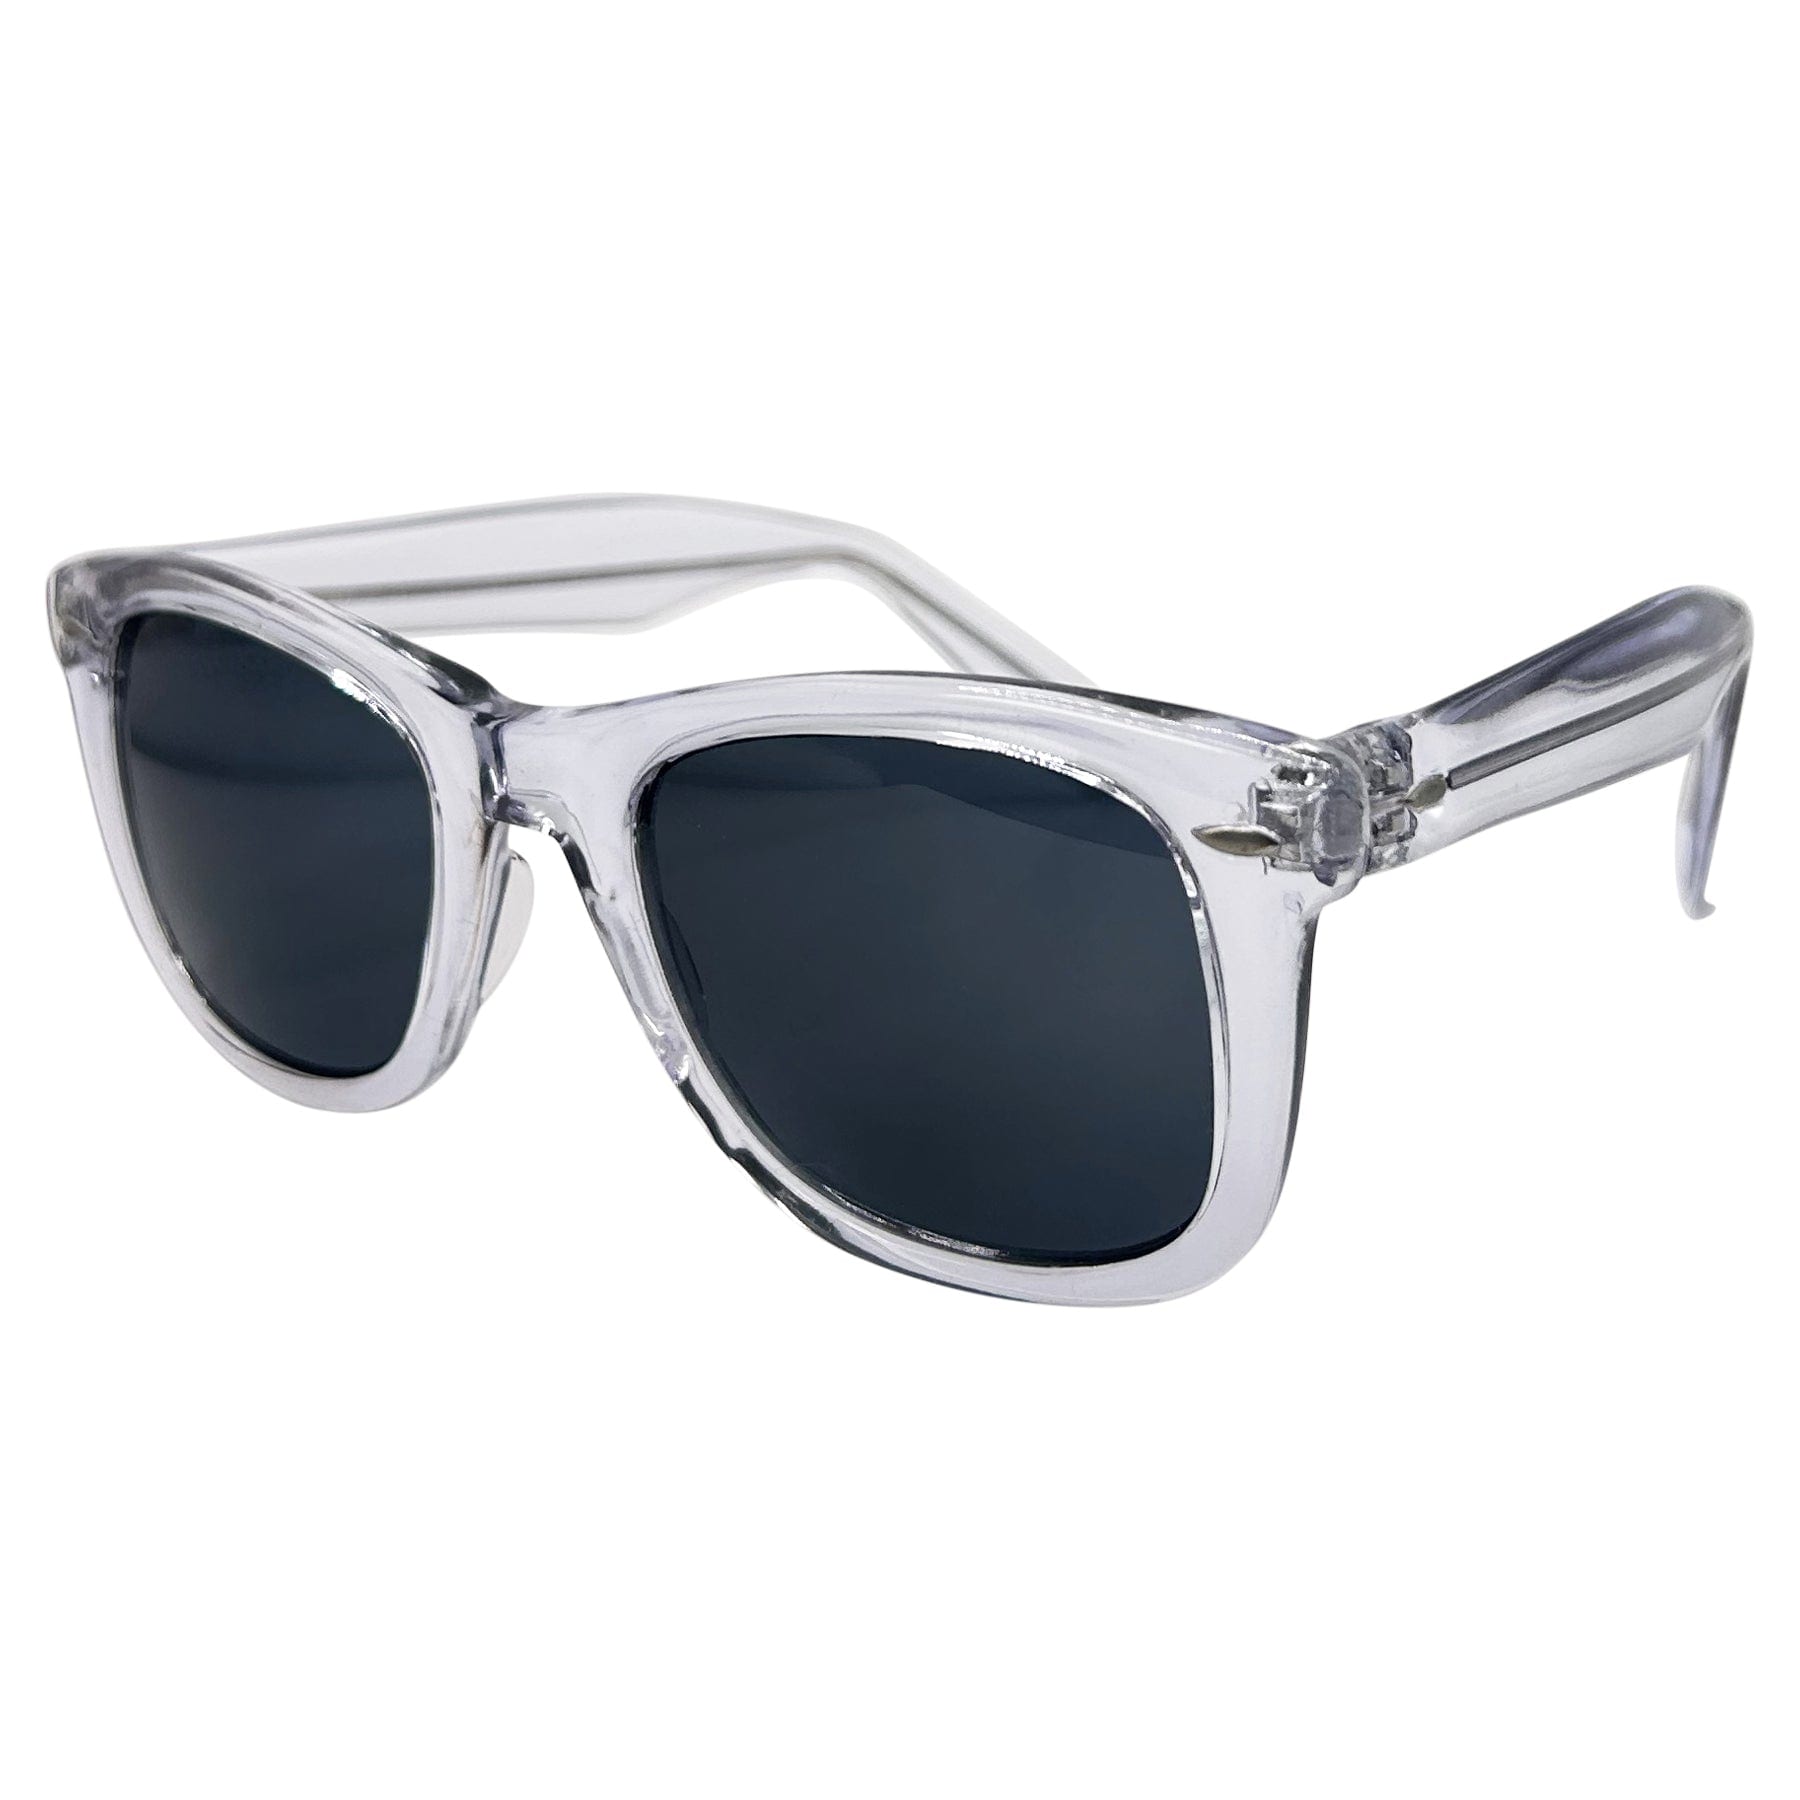 vintage sunglasses with a crystal gray clear frame and classic style